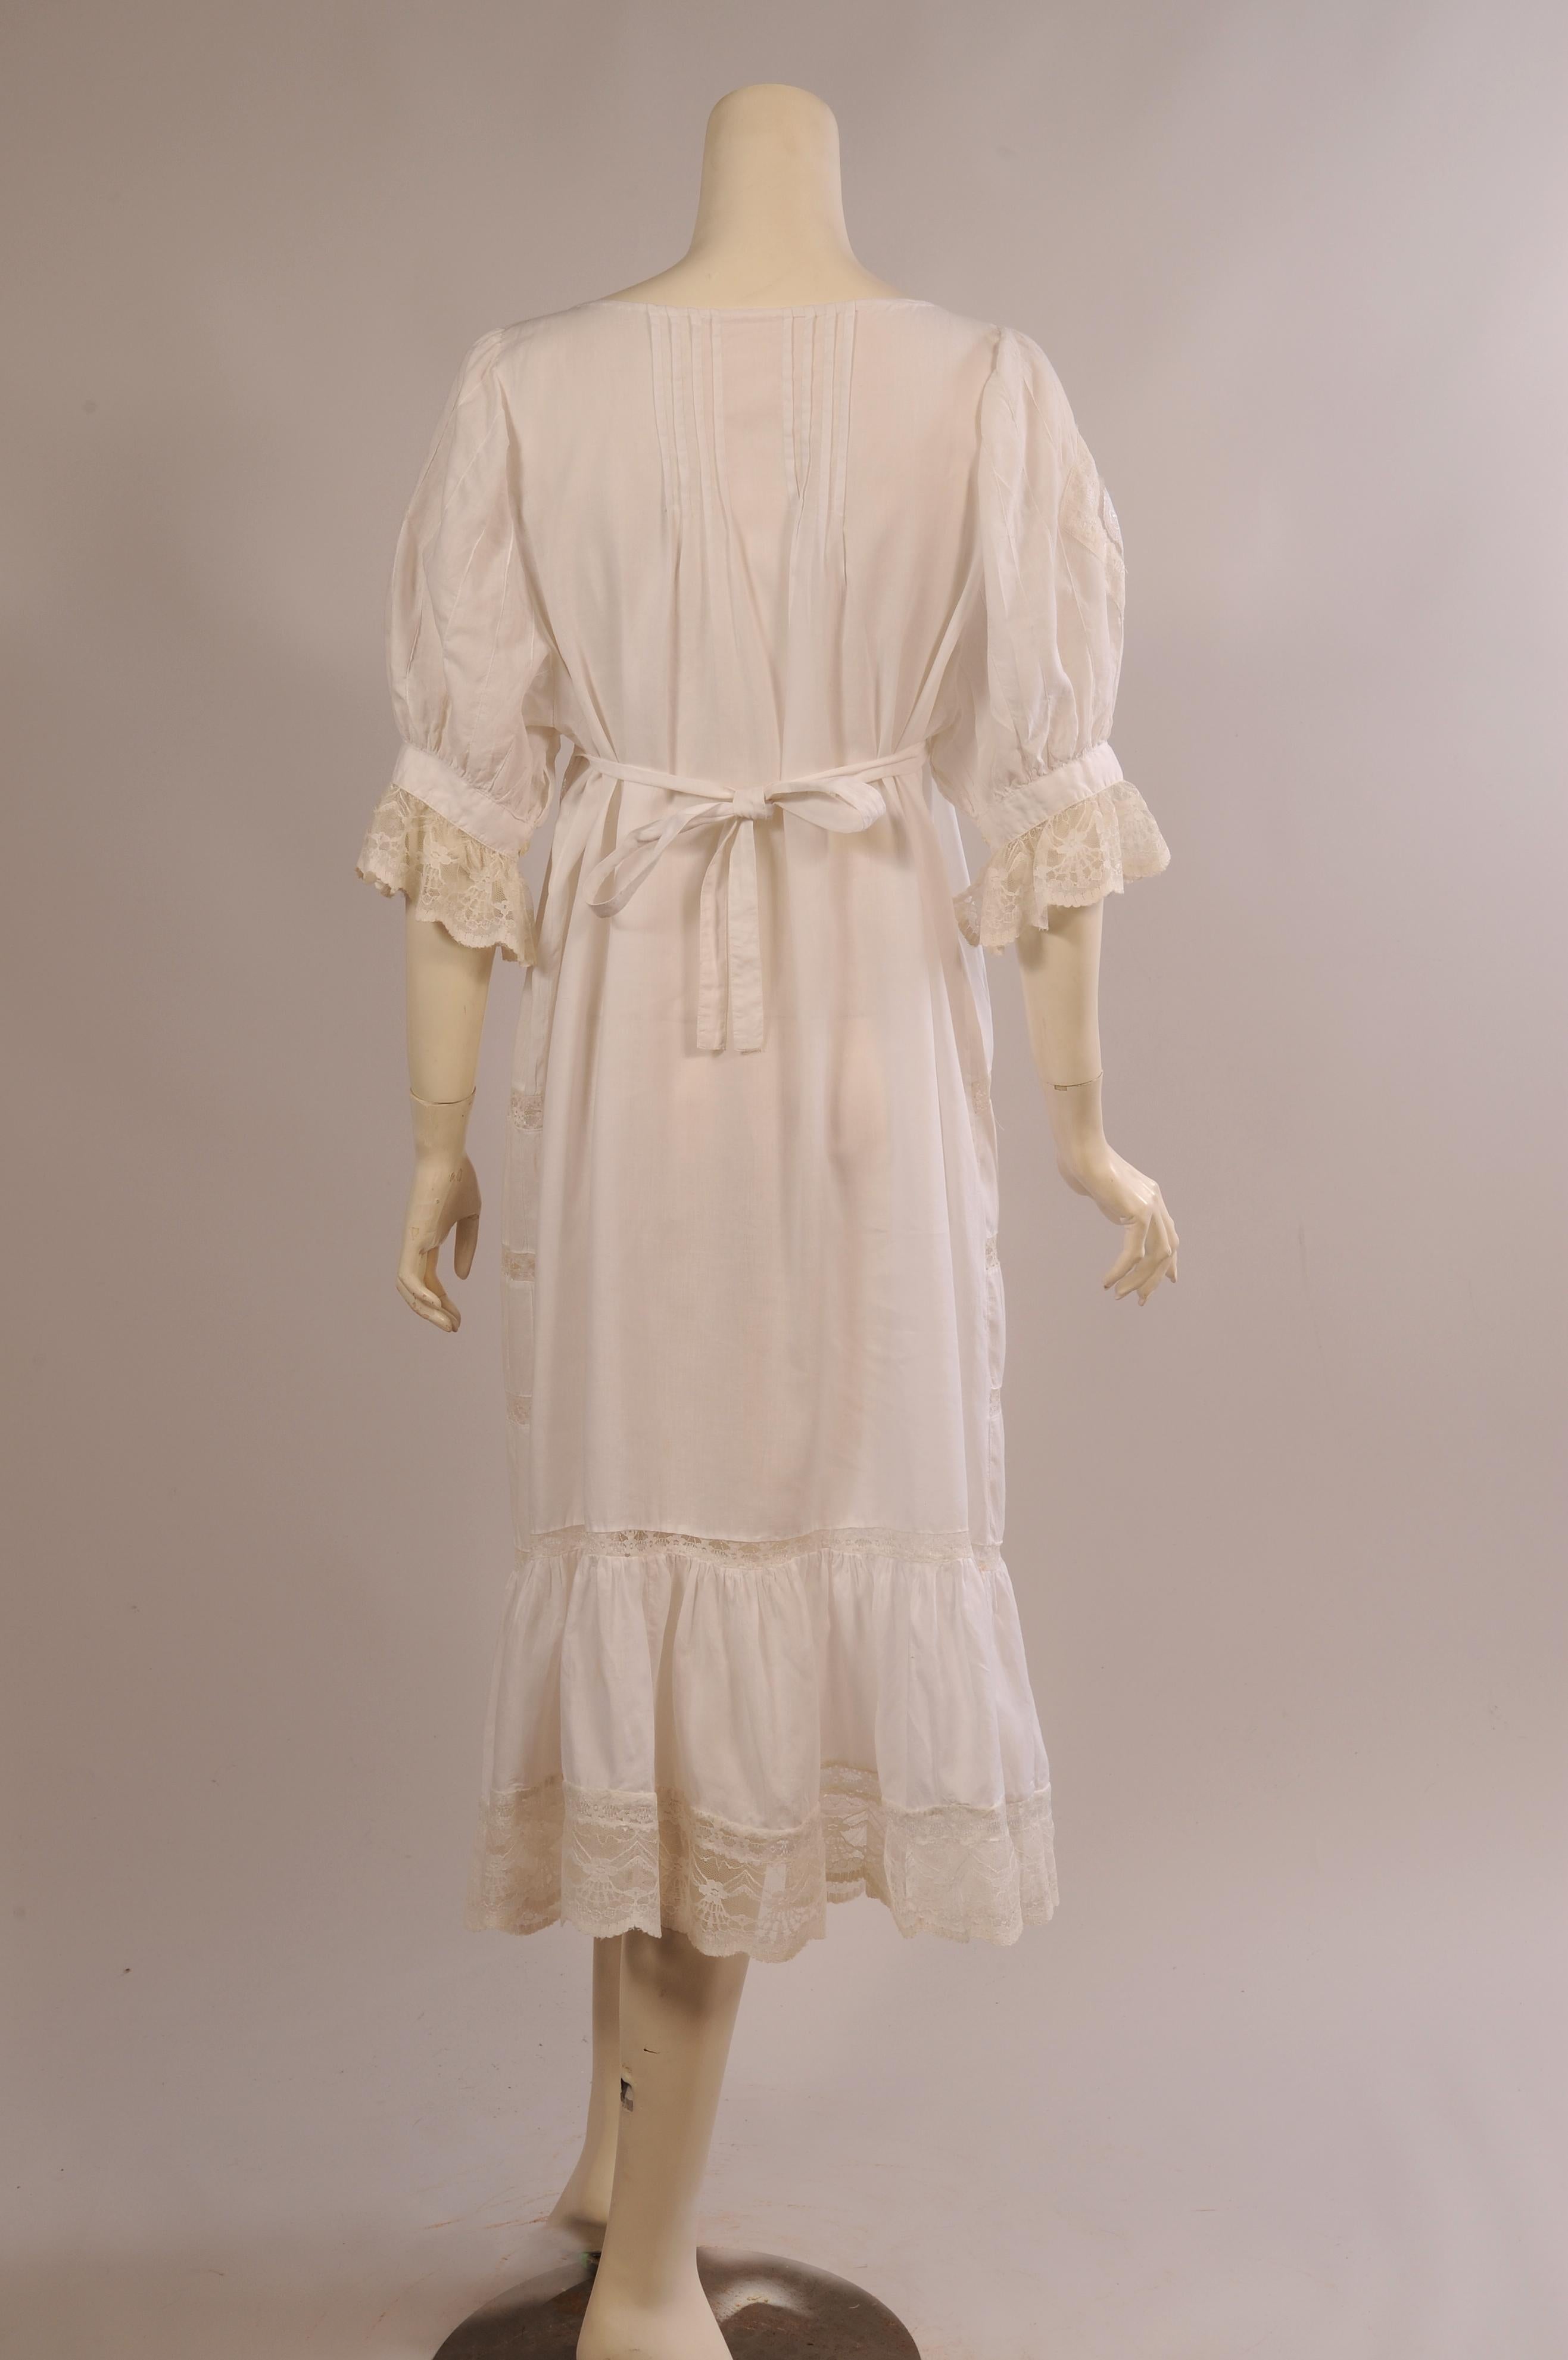 Victorian Inspired White Cotton and Lace Dress circa 1980 In Excellent Condition For Sale In New Hope, PA